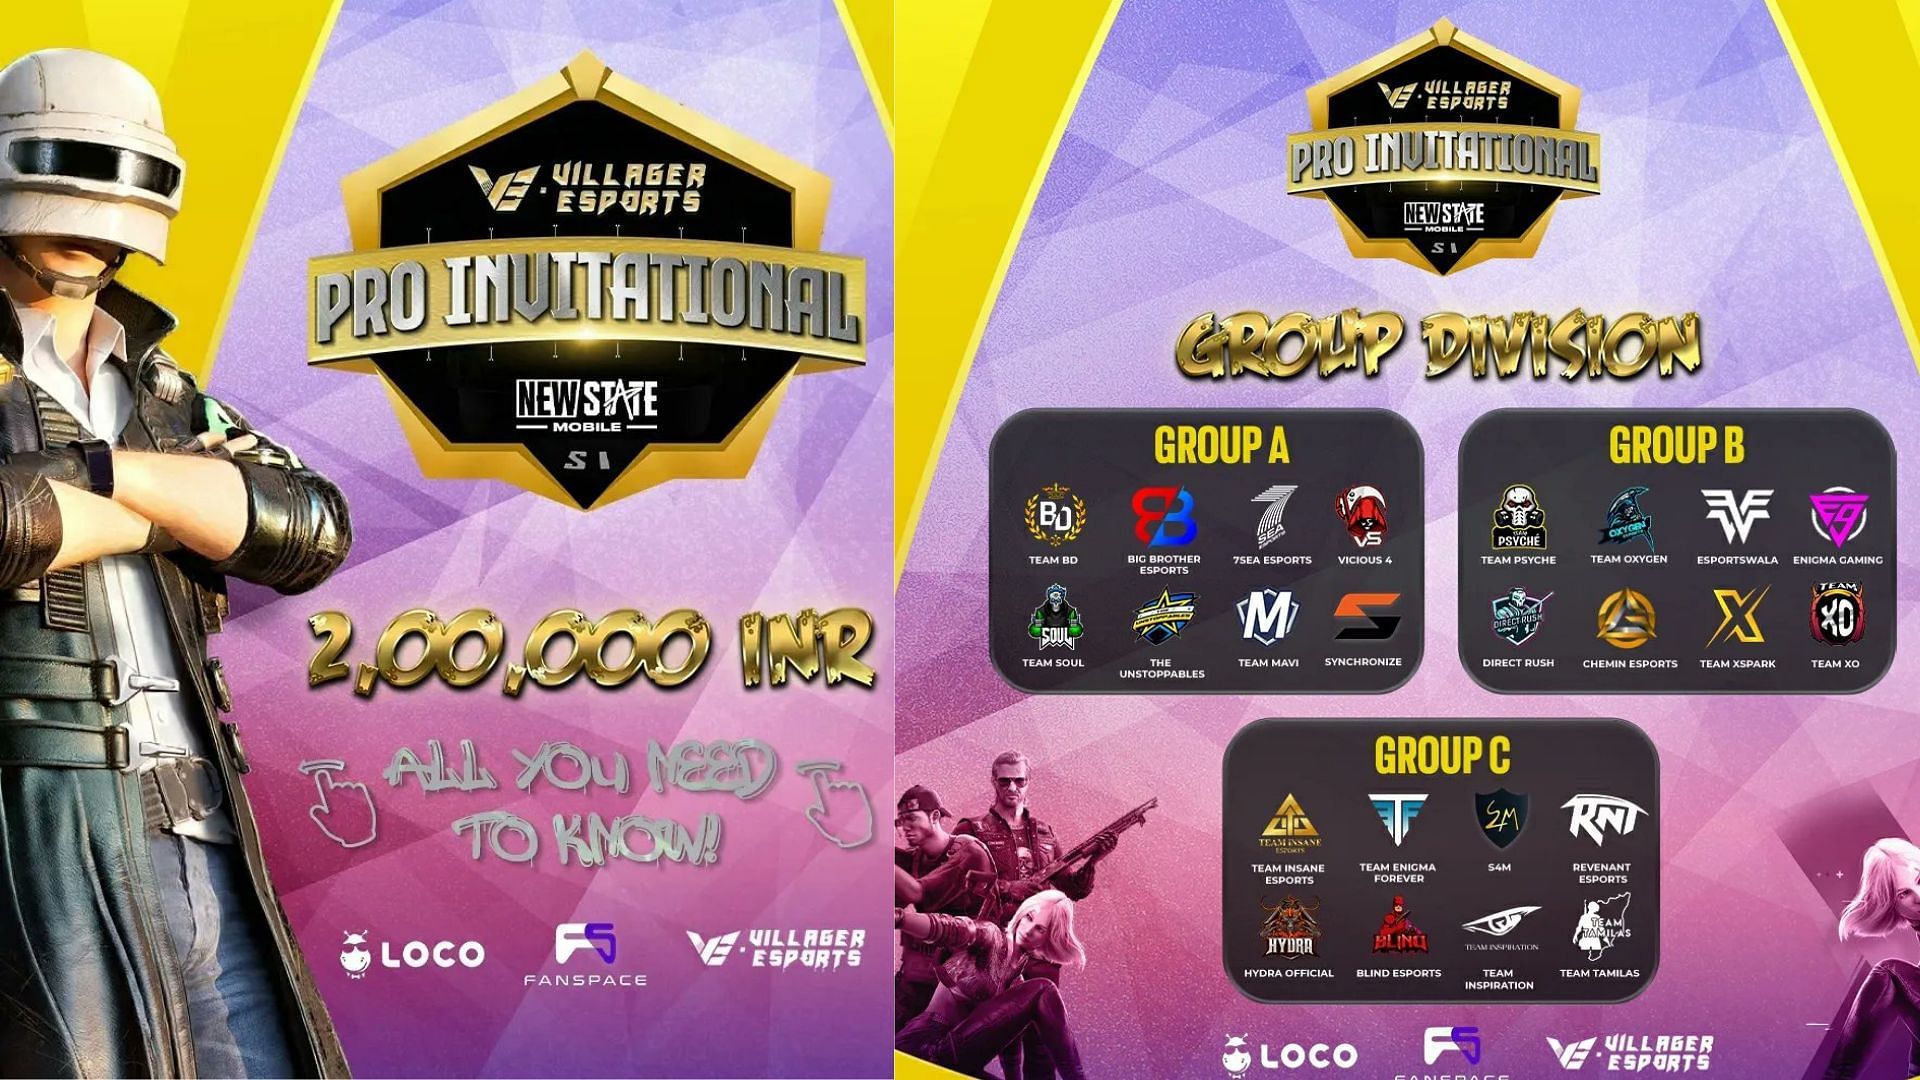 PUBG New State Mobile Pro Invitational Teams, schedule, format, and more